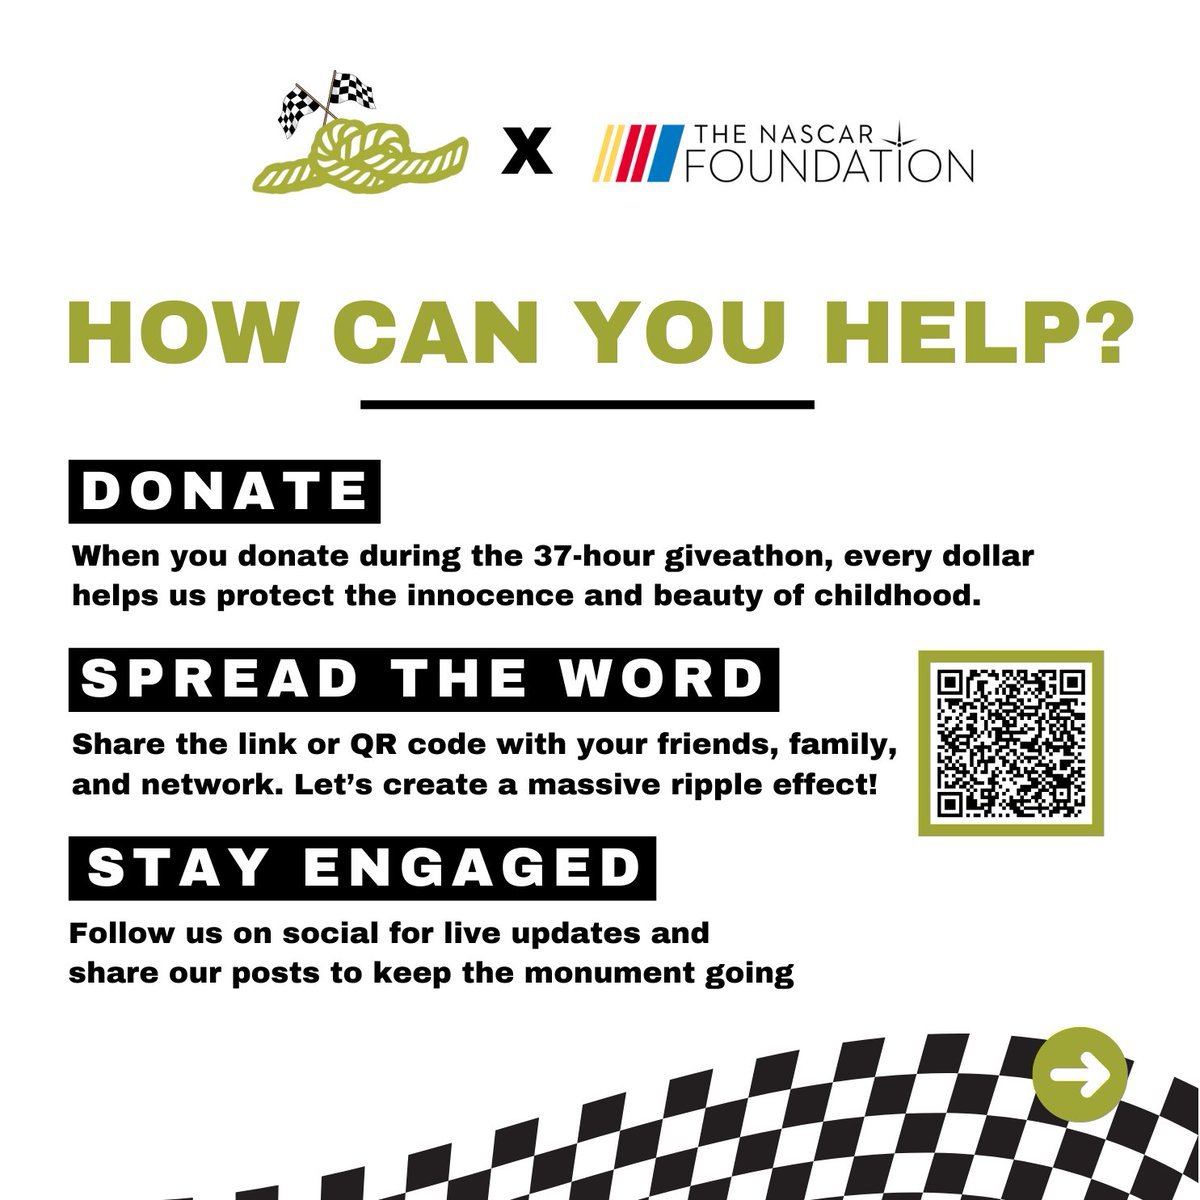 KT is one of 350 charities selected for the 2nd Annual @NASCAR_FDN Giveathon Day! Join us May 14/15 for a fundraising marathon. Let's protect children from abuse together! Scan, donate, and share to make a difference! #NASCARGiveathon Learn more:tinyurl.com/55nau3tn